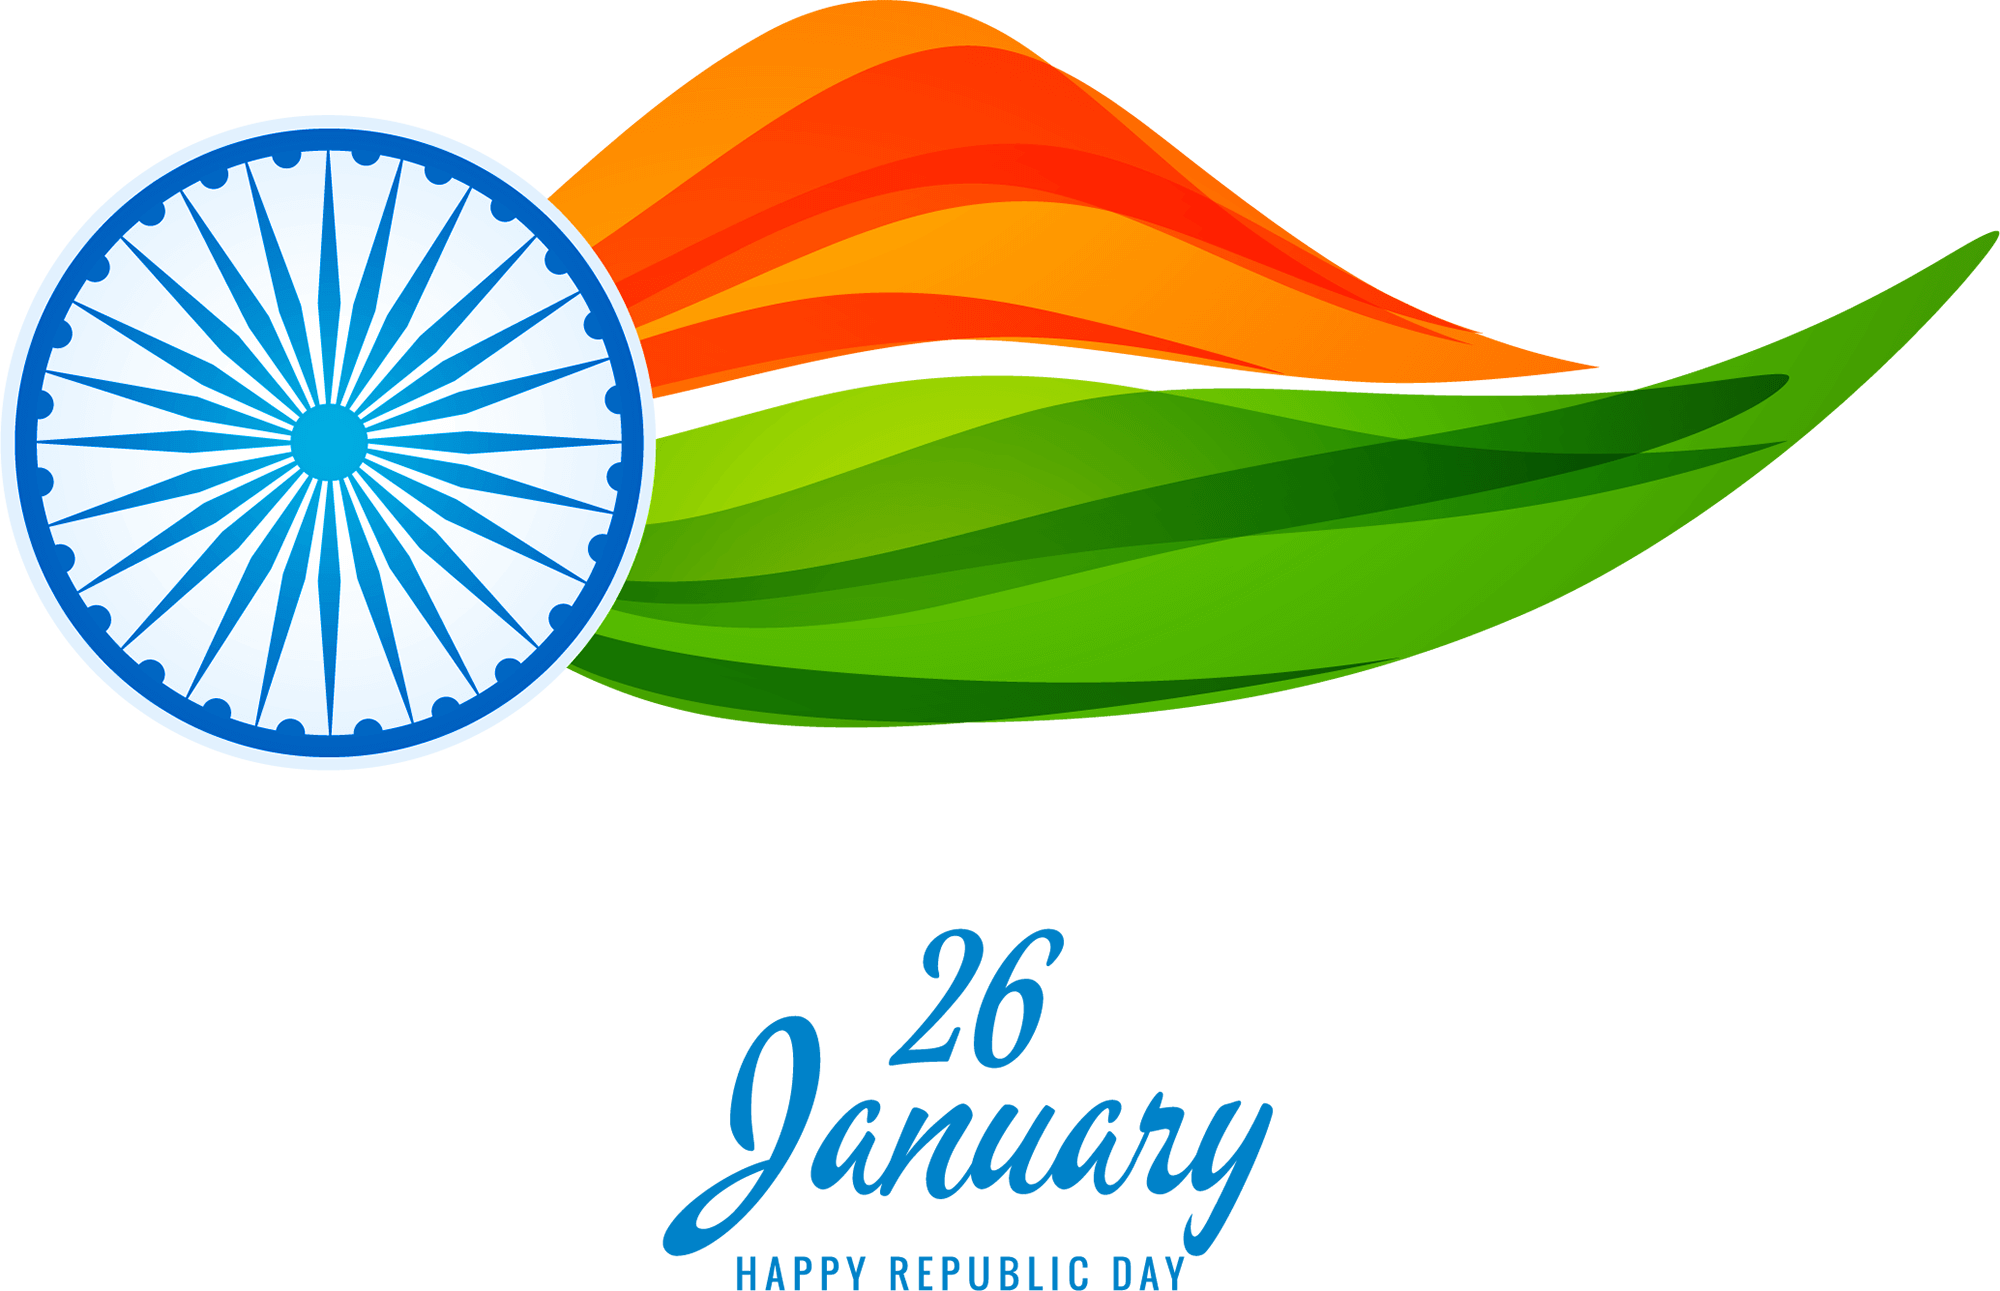 Clipart republic day image illustration png vector - Pngfreepic